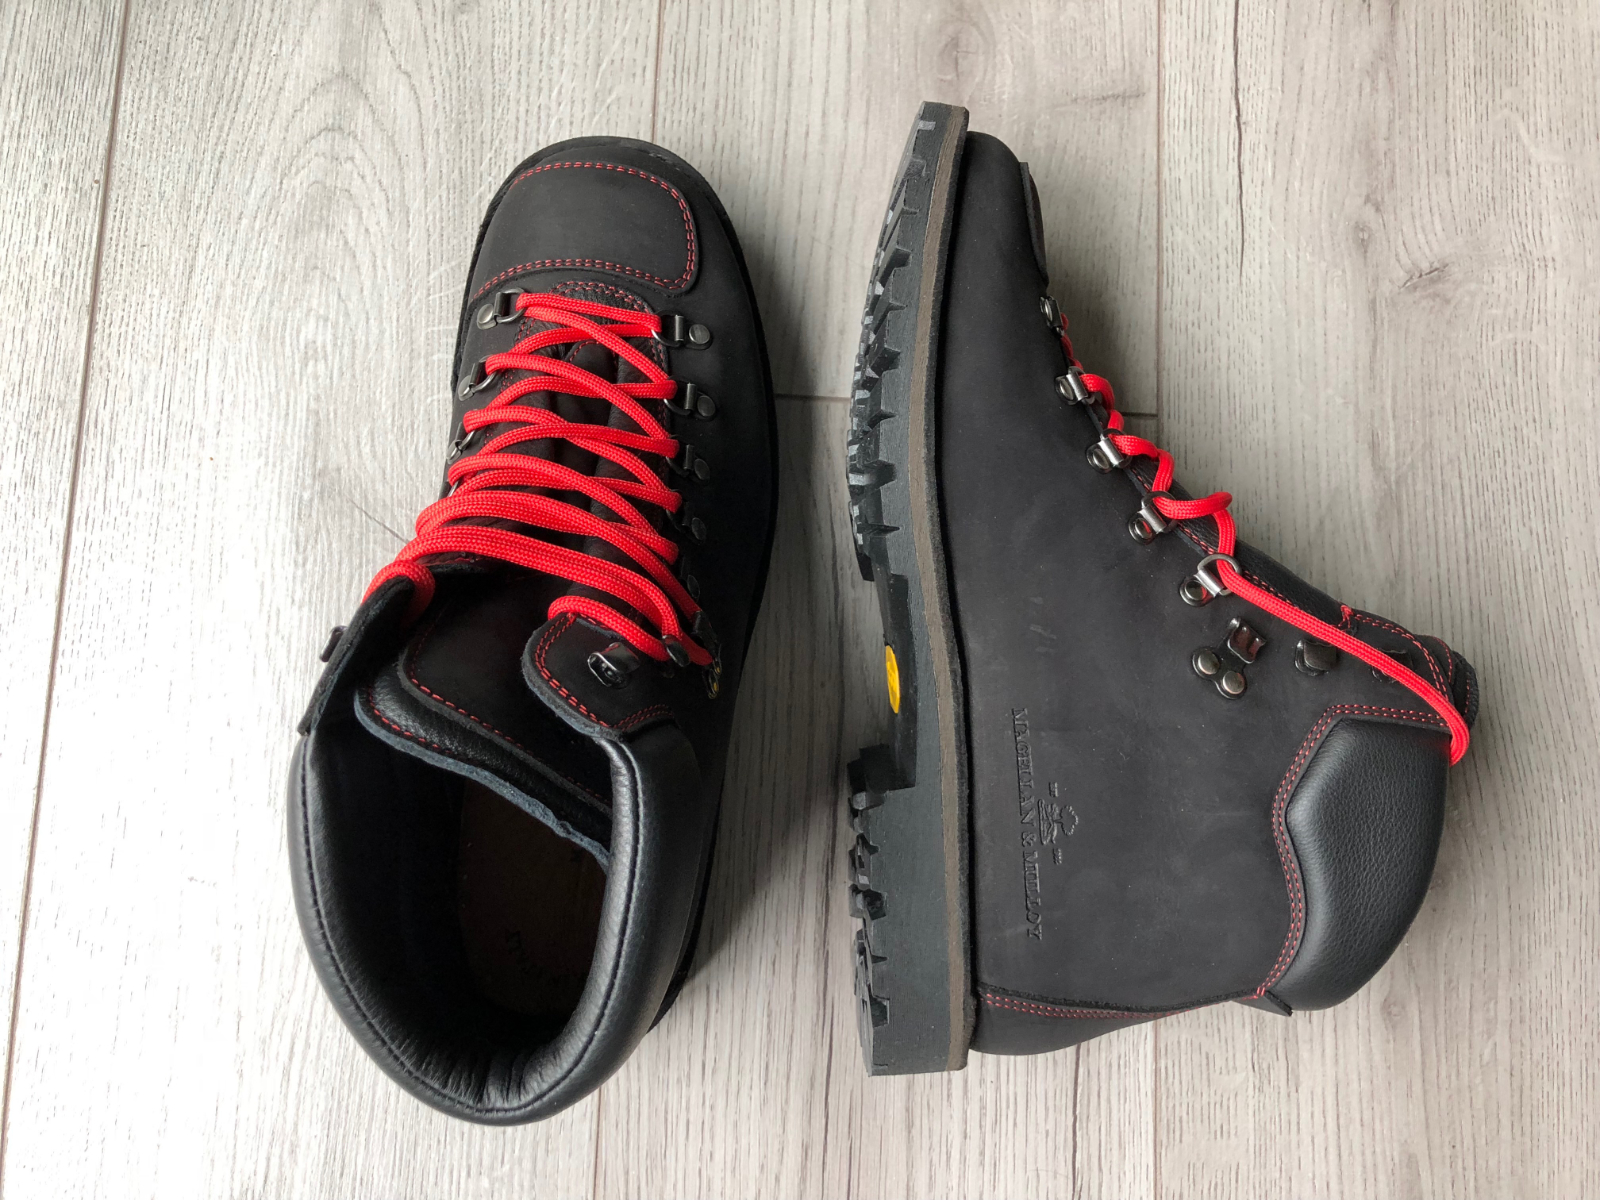 magellan and mulloy motorcycle boots